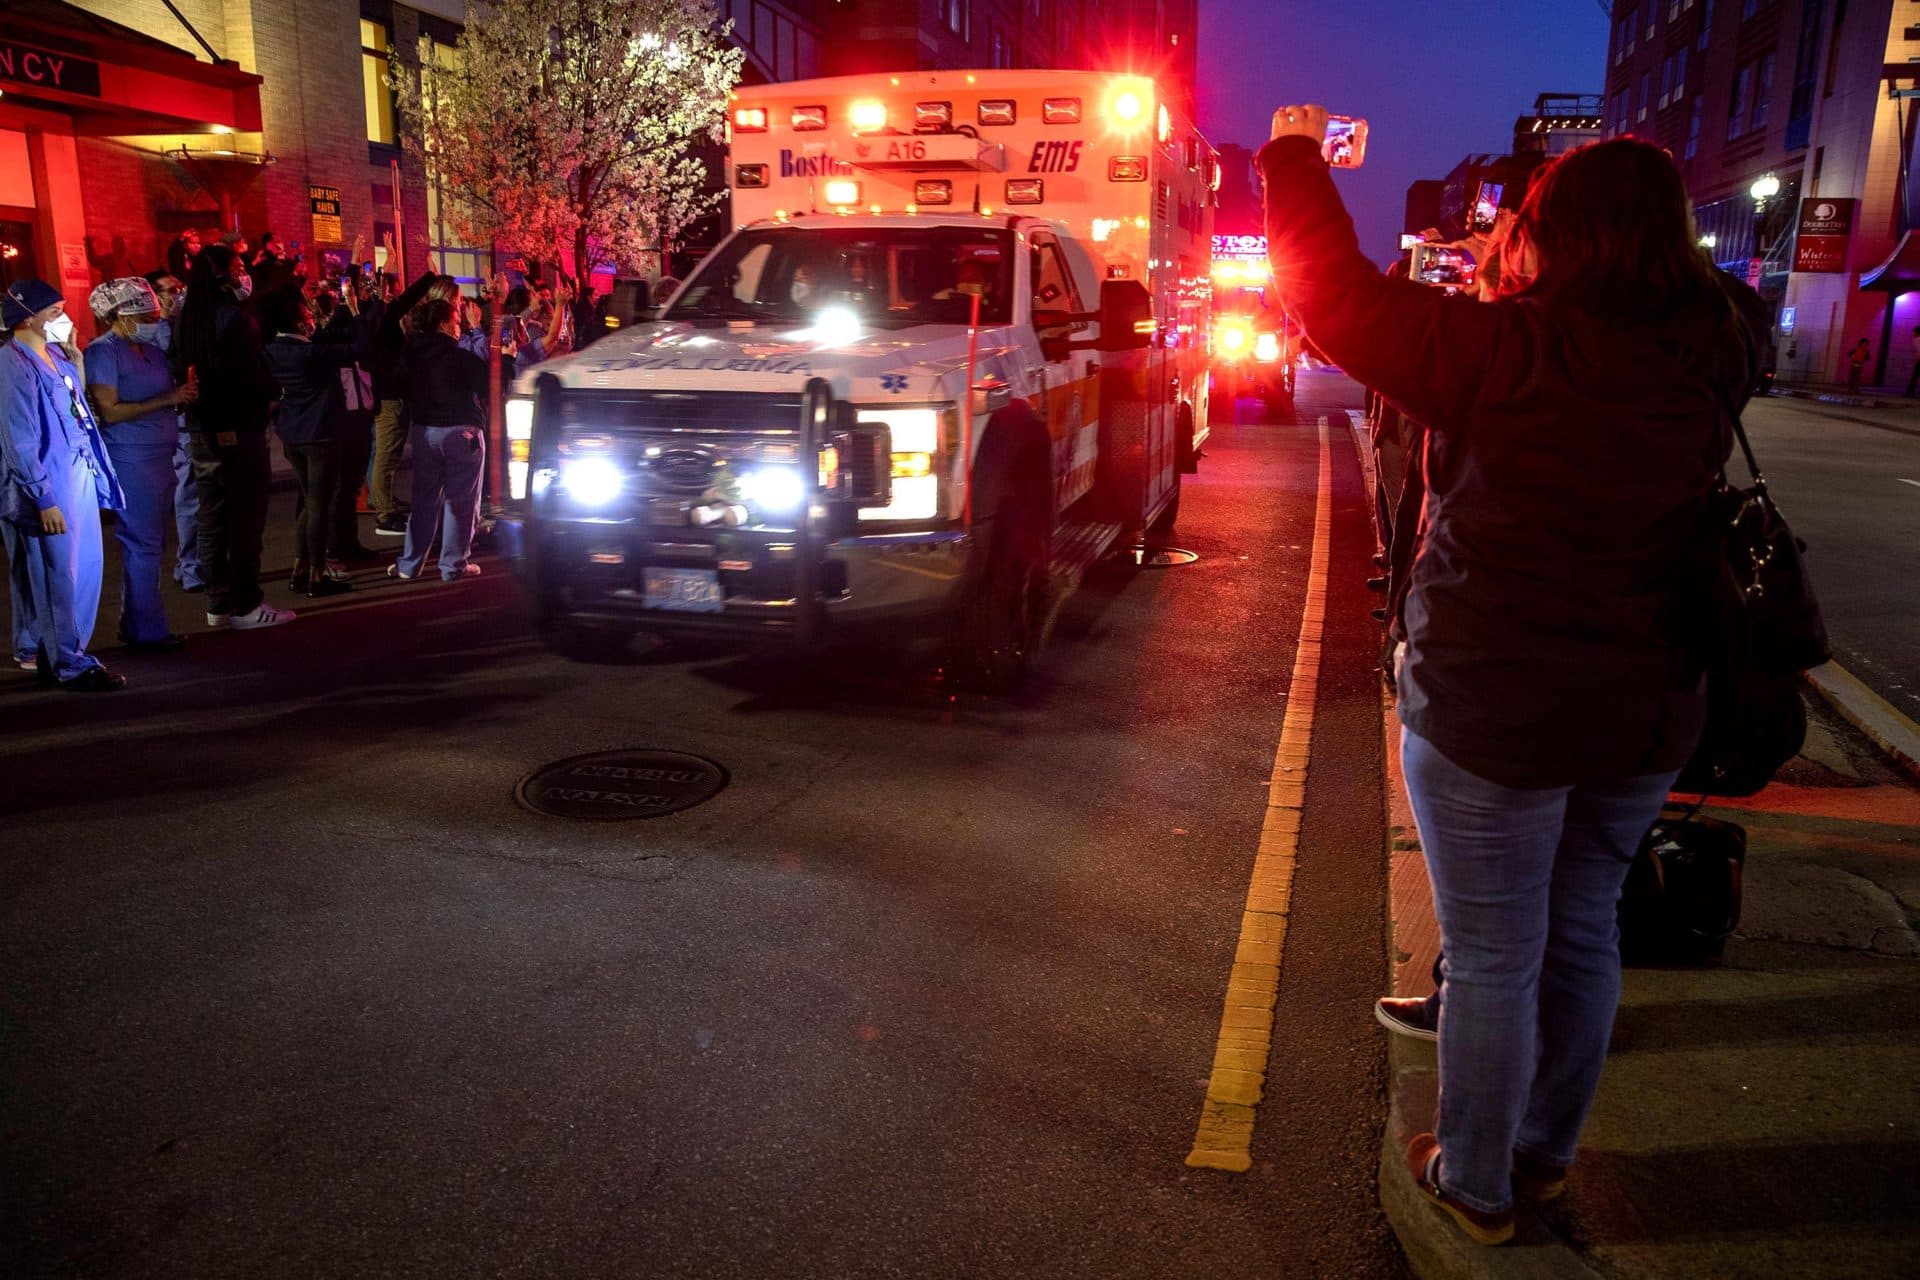 A Boston EMS vehicle with lights flashing drives by Tufts Medical Center in a show of support for healthcare workers. (Robin Lubbock/WBUR)